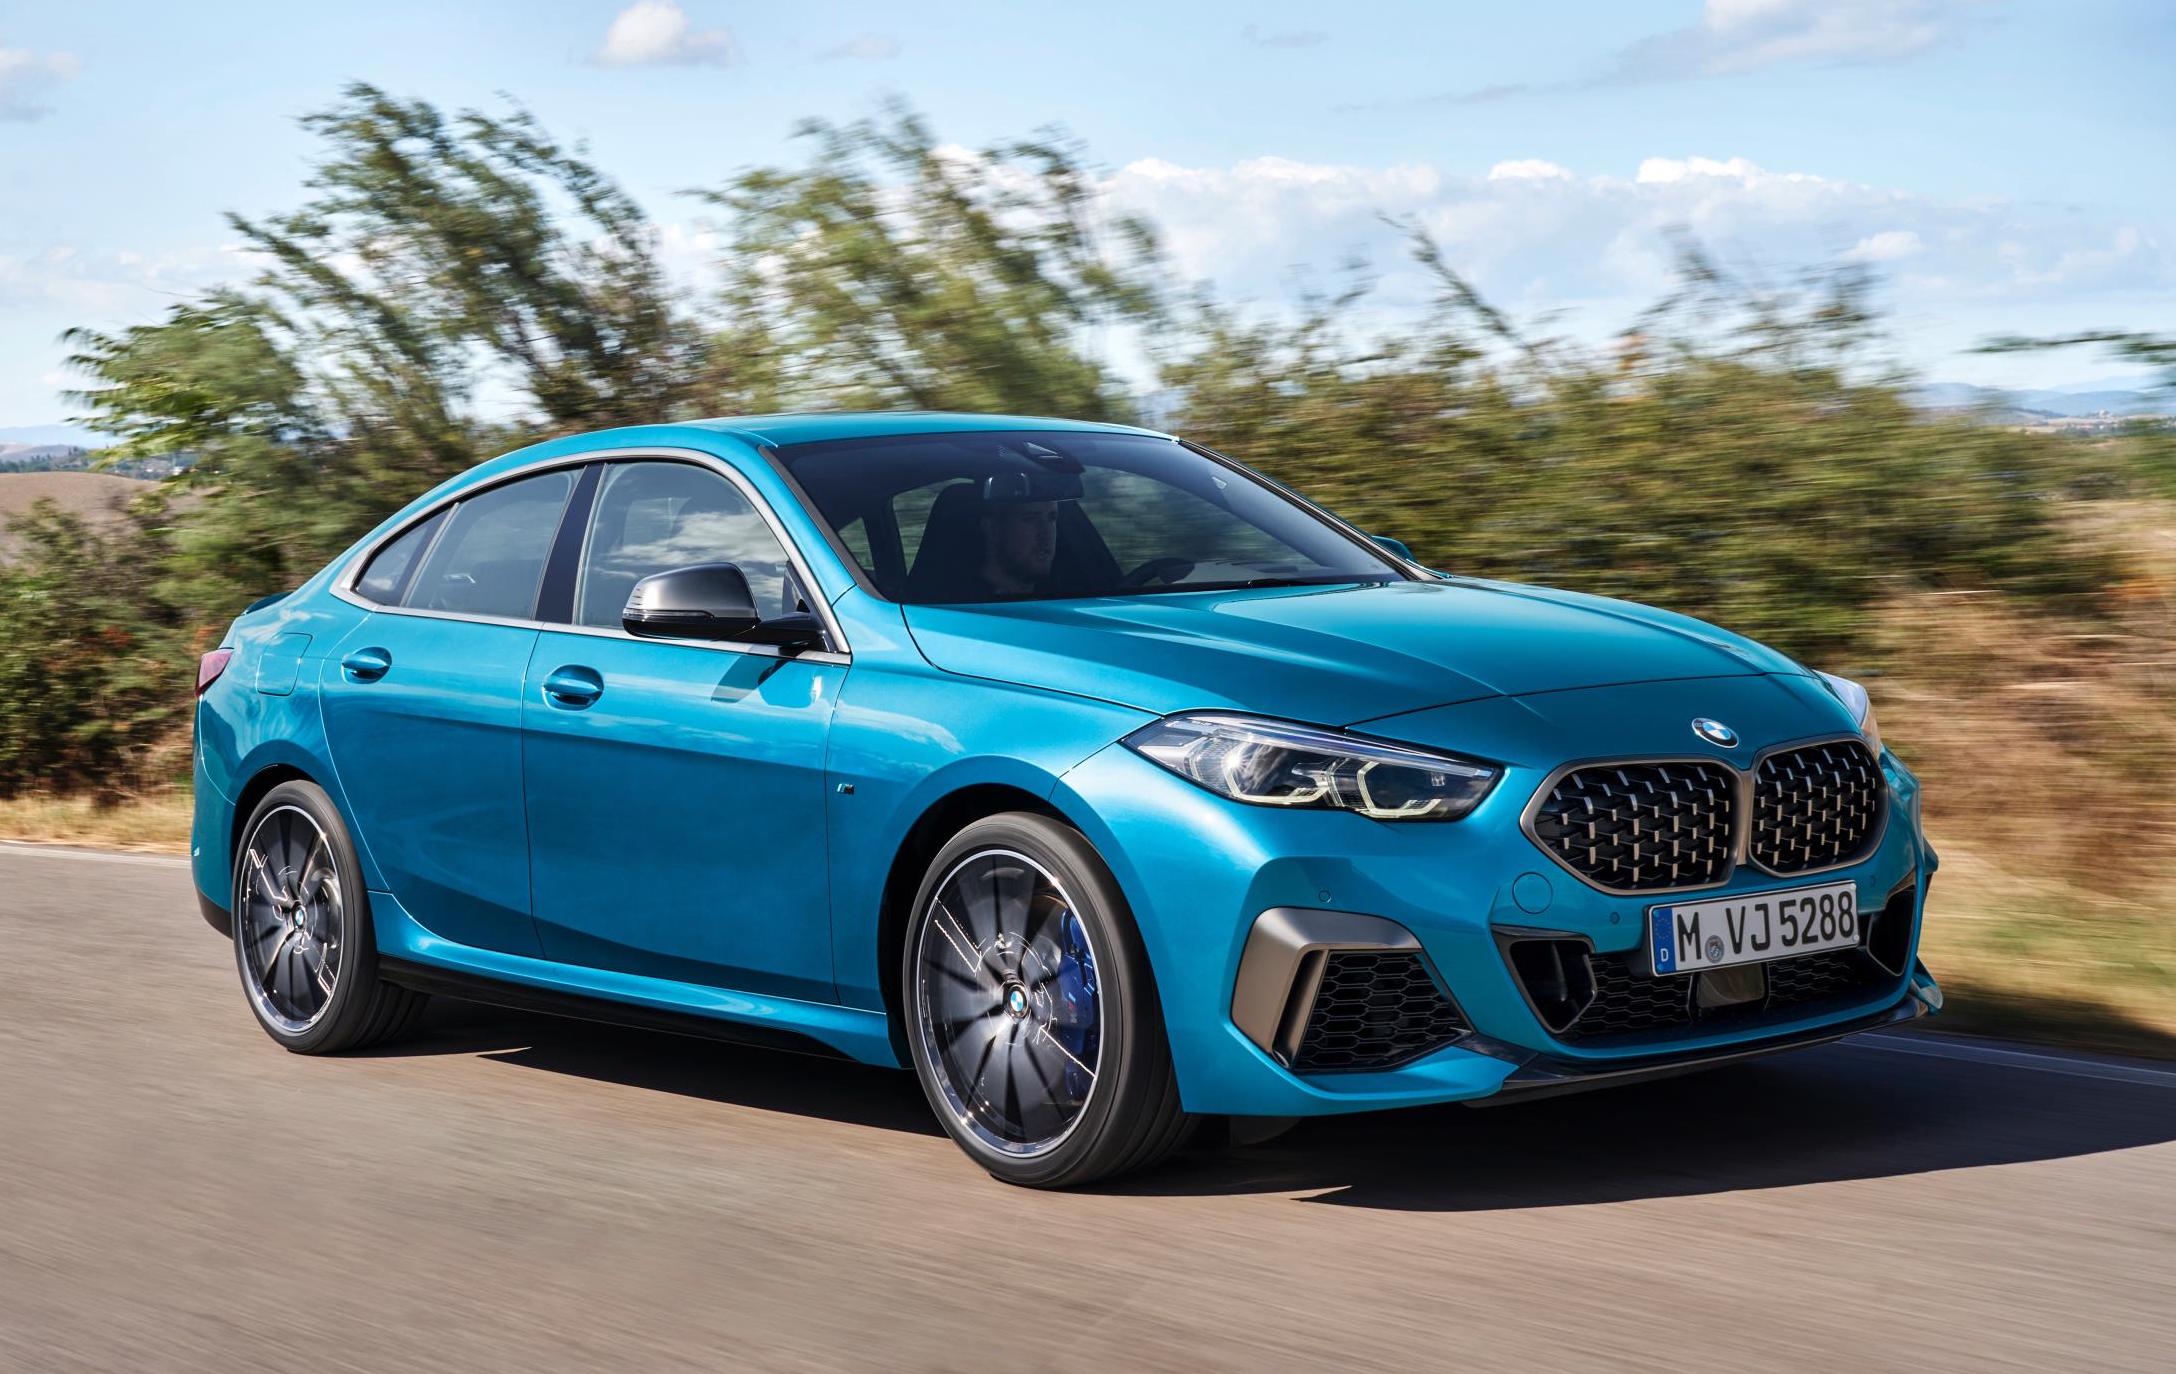 2020 BMW 2 Series Gran Coupe revealed, confirmed for Australia